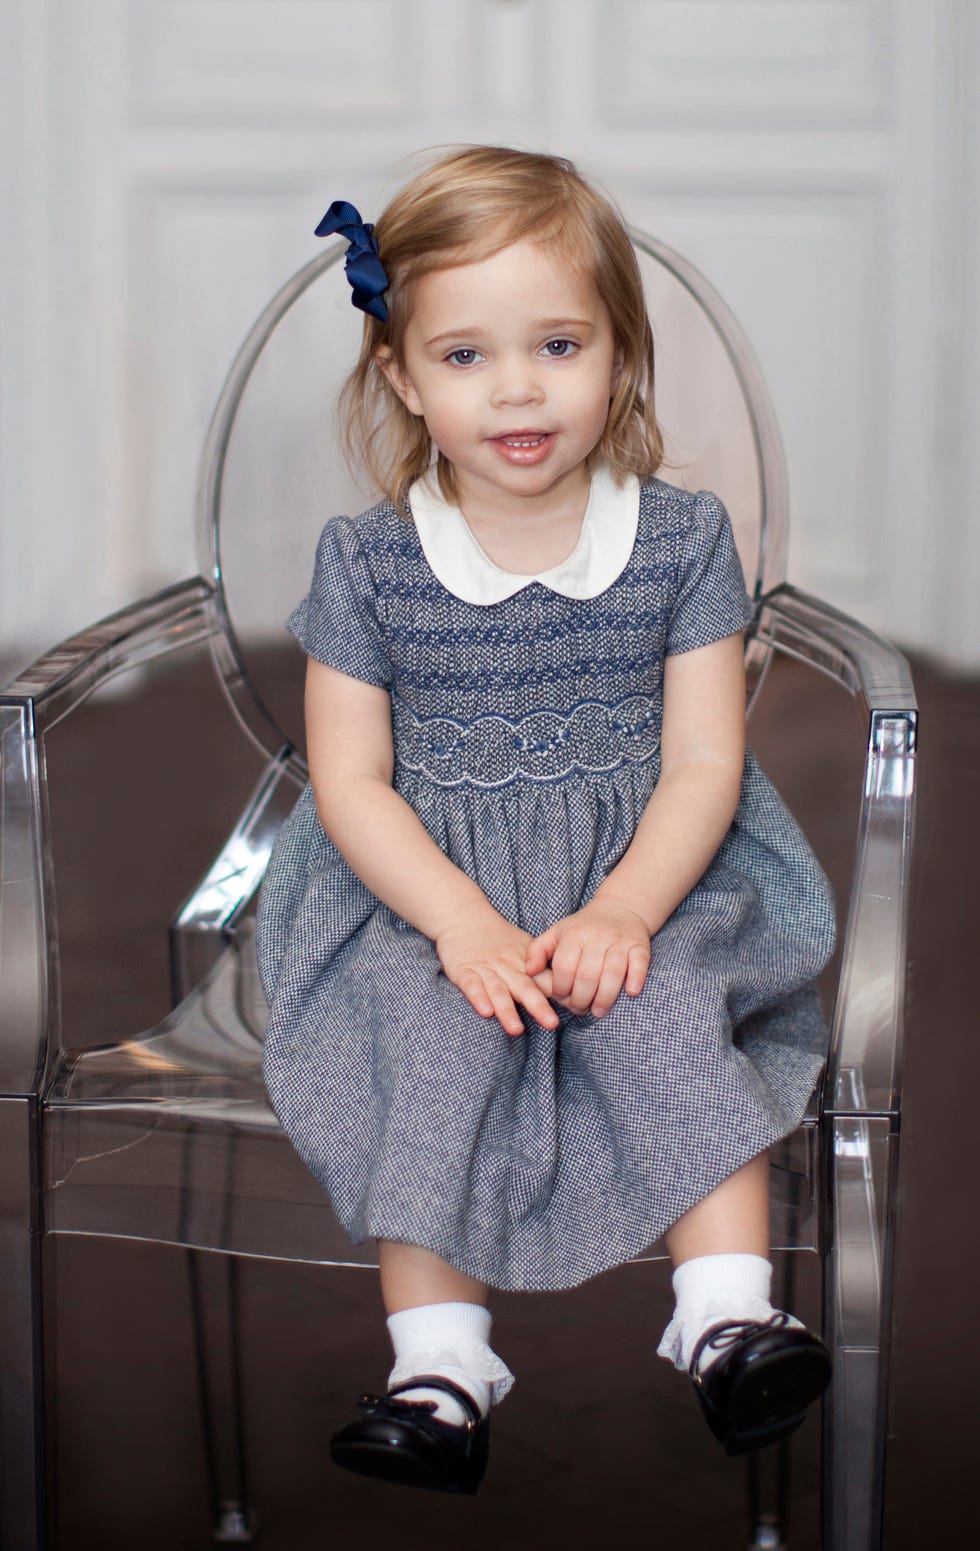 hkh prinsessan leonore  hrh princess leonorecopyright the royal court, sweden must always be stated on publication